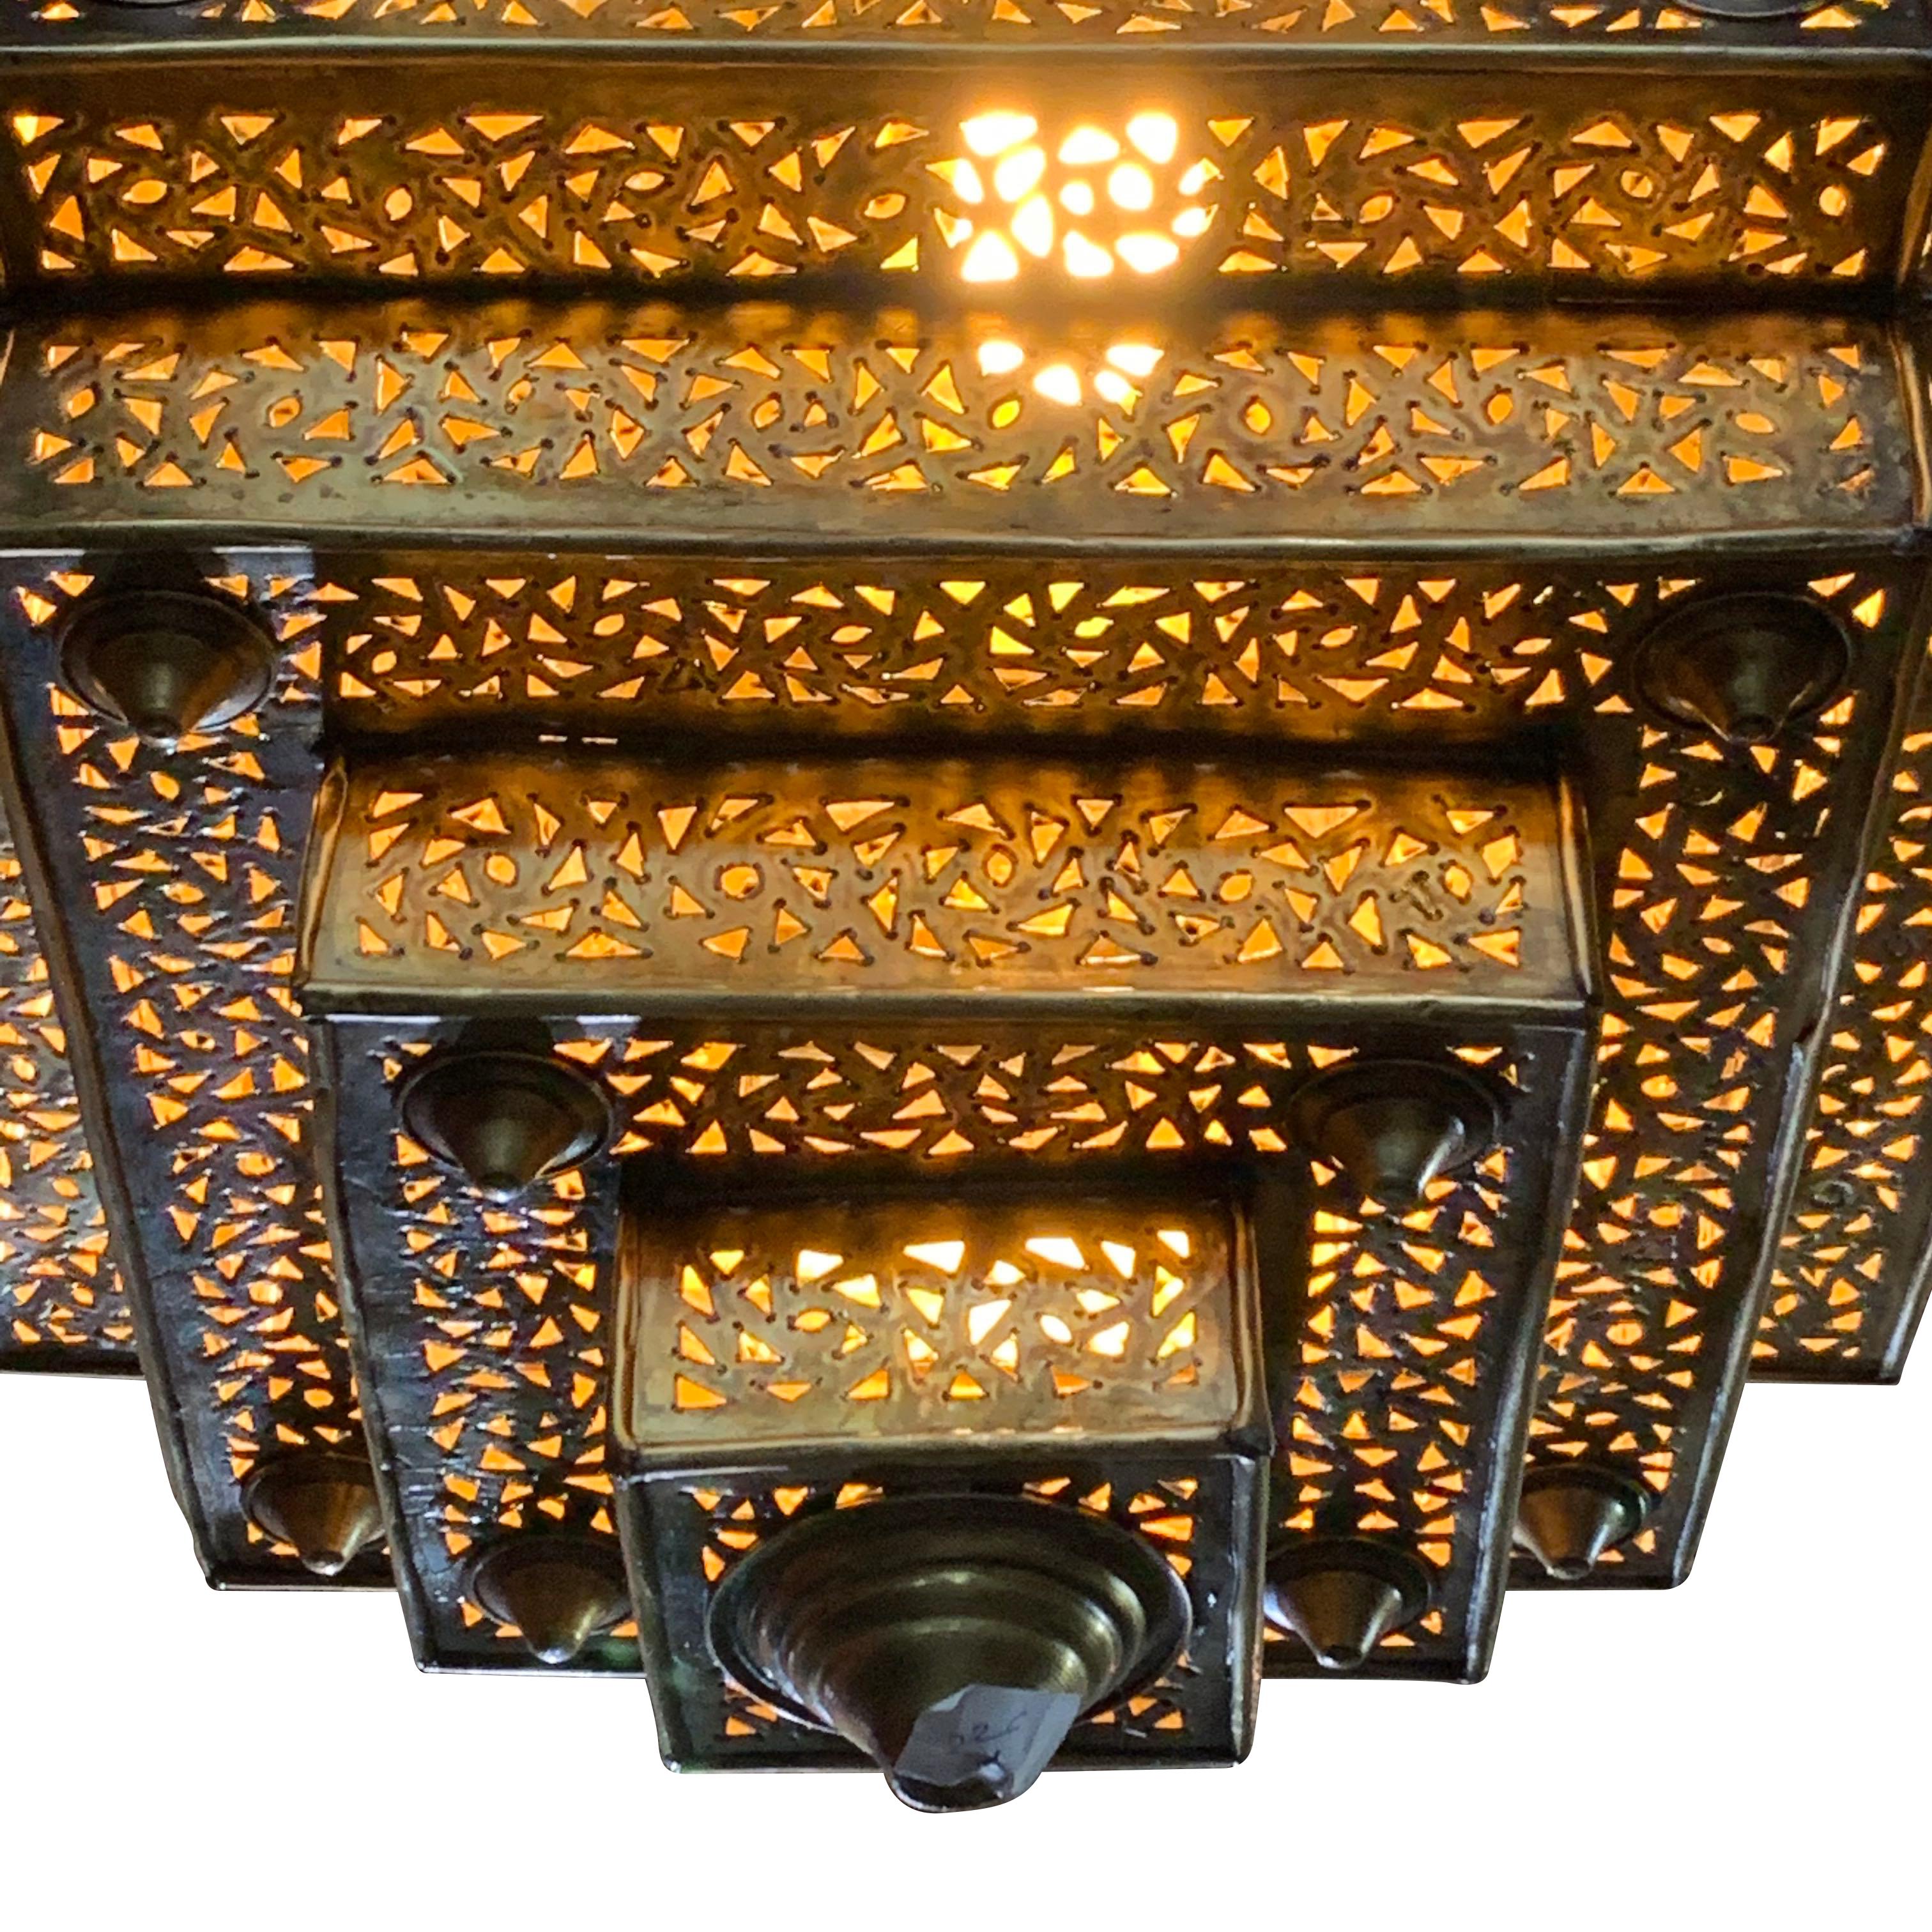 Moroccan square perforated bronze chandelier.
Multi-tiered design.
Recently rewired.
Overall height 44